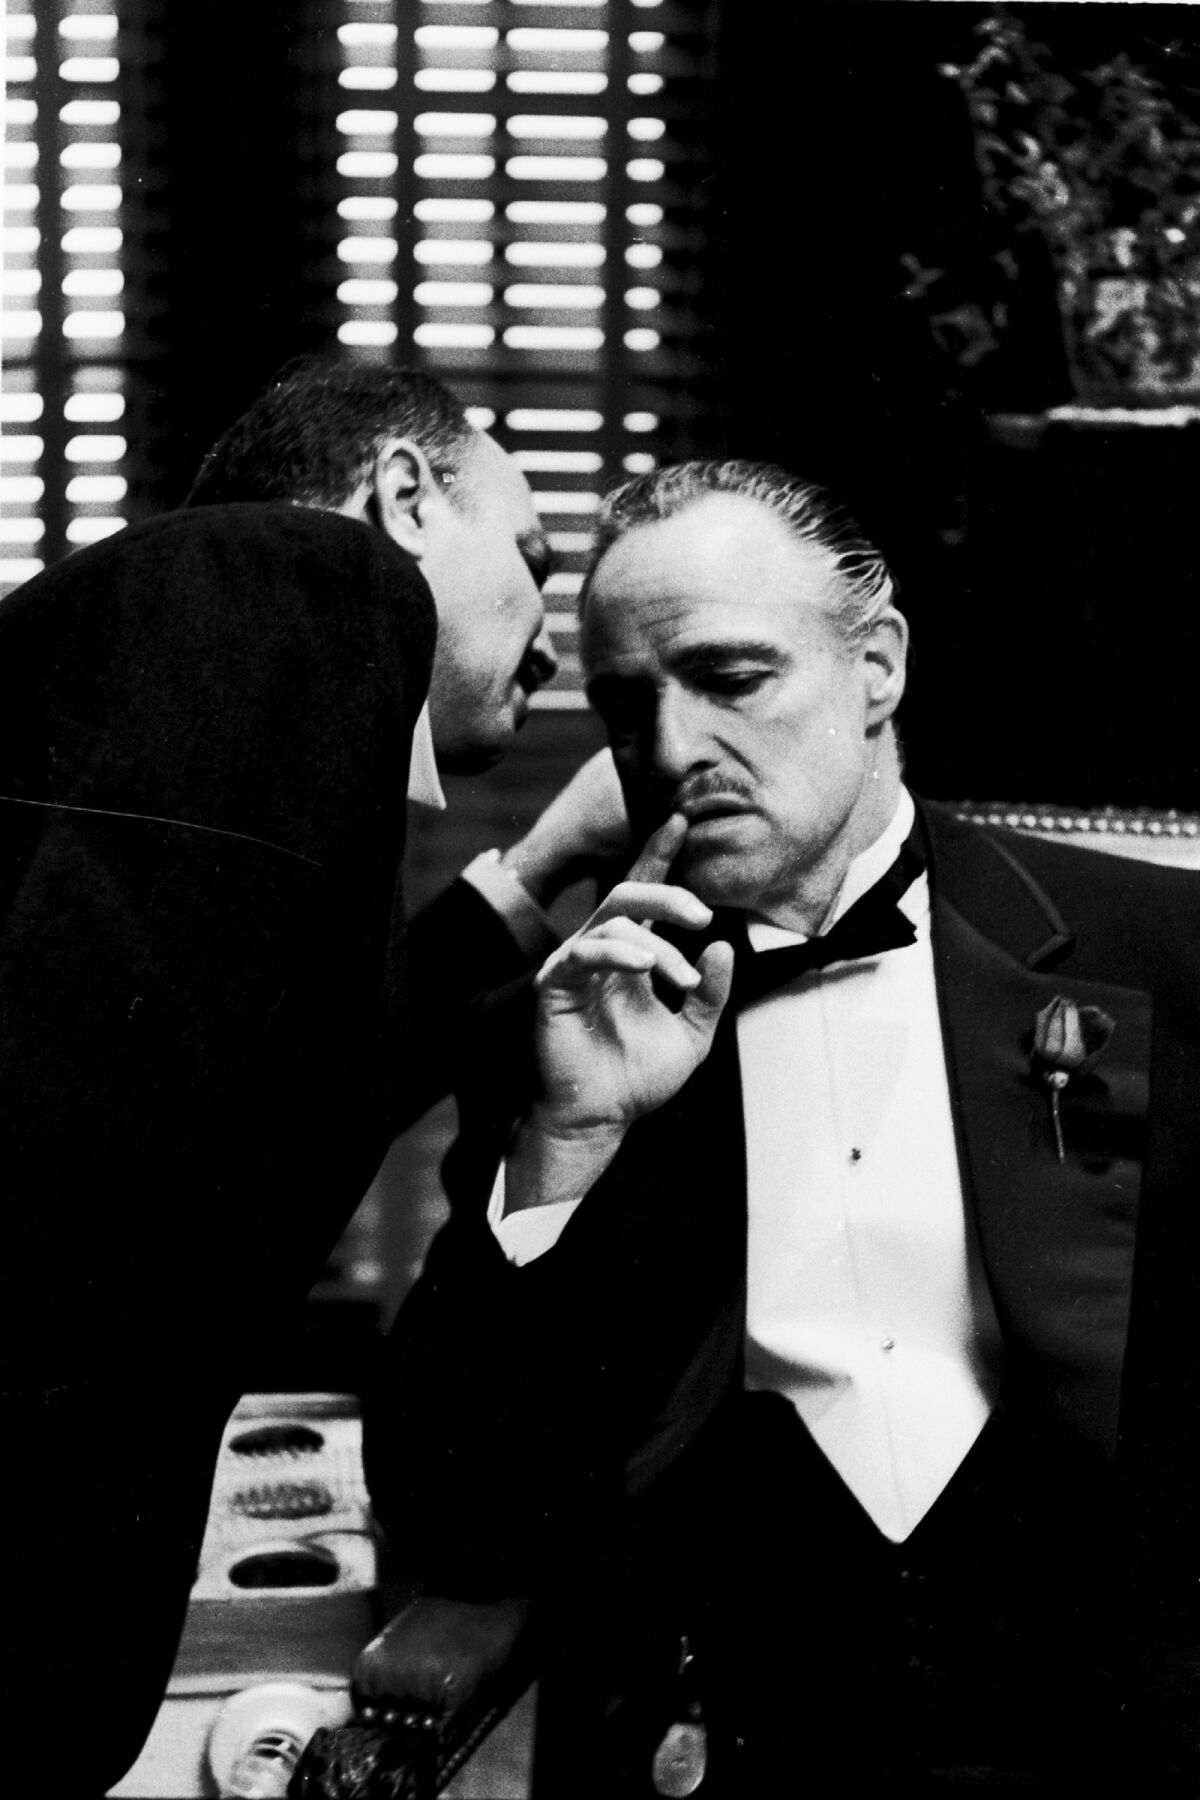 A man whispers into the ear of another man who is wearing a tuxedo.